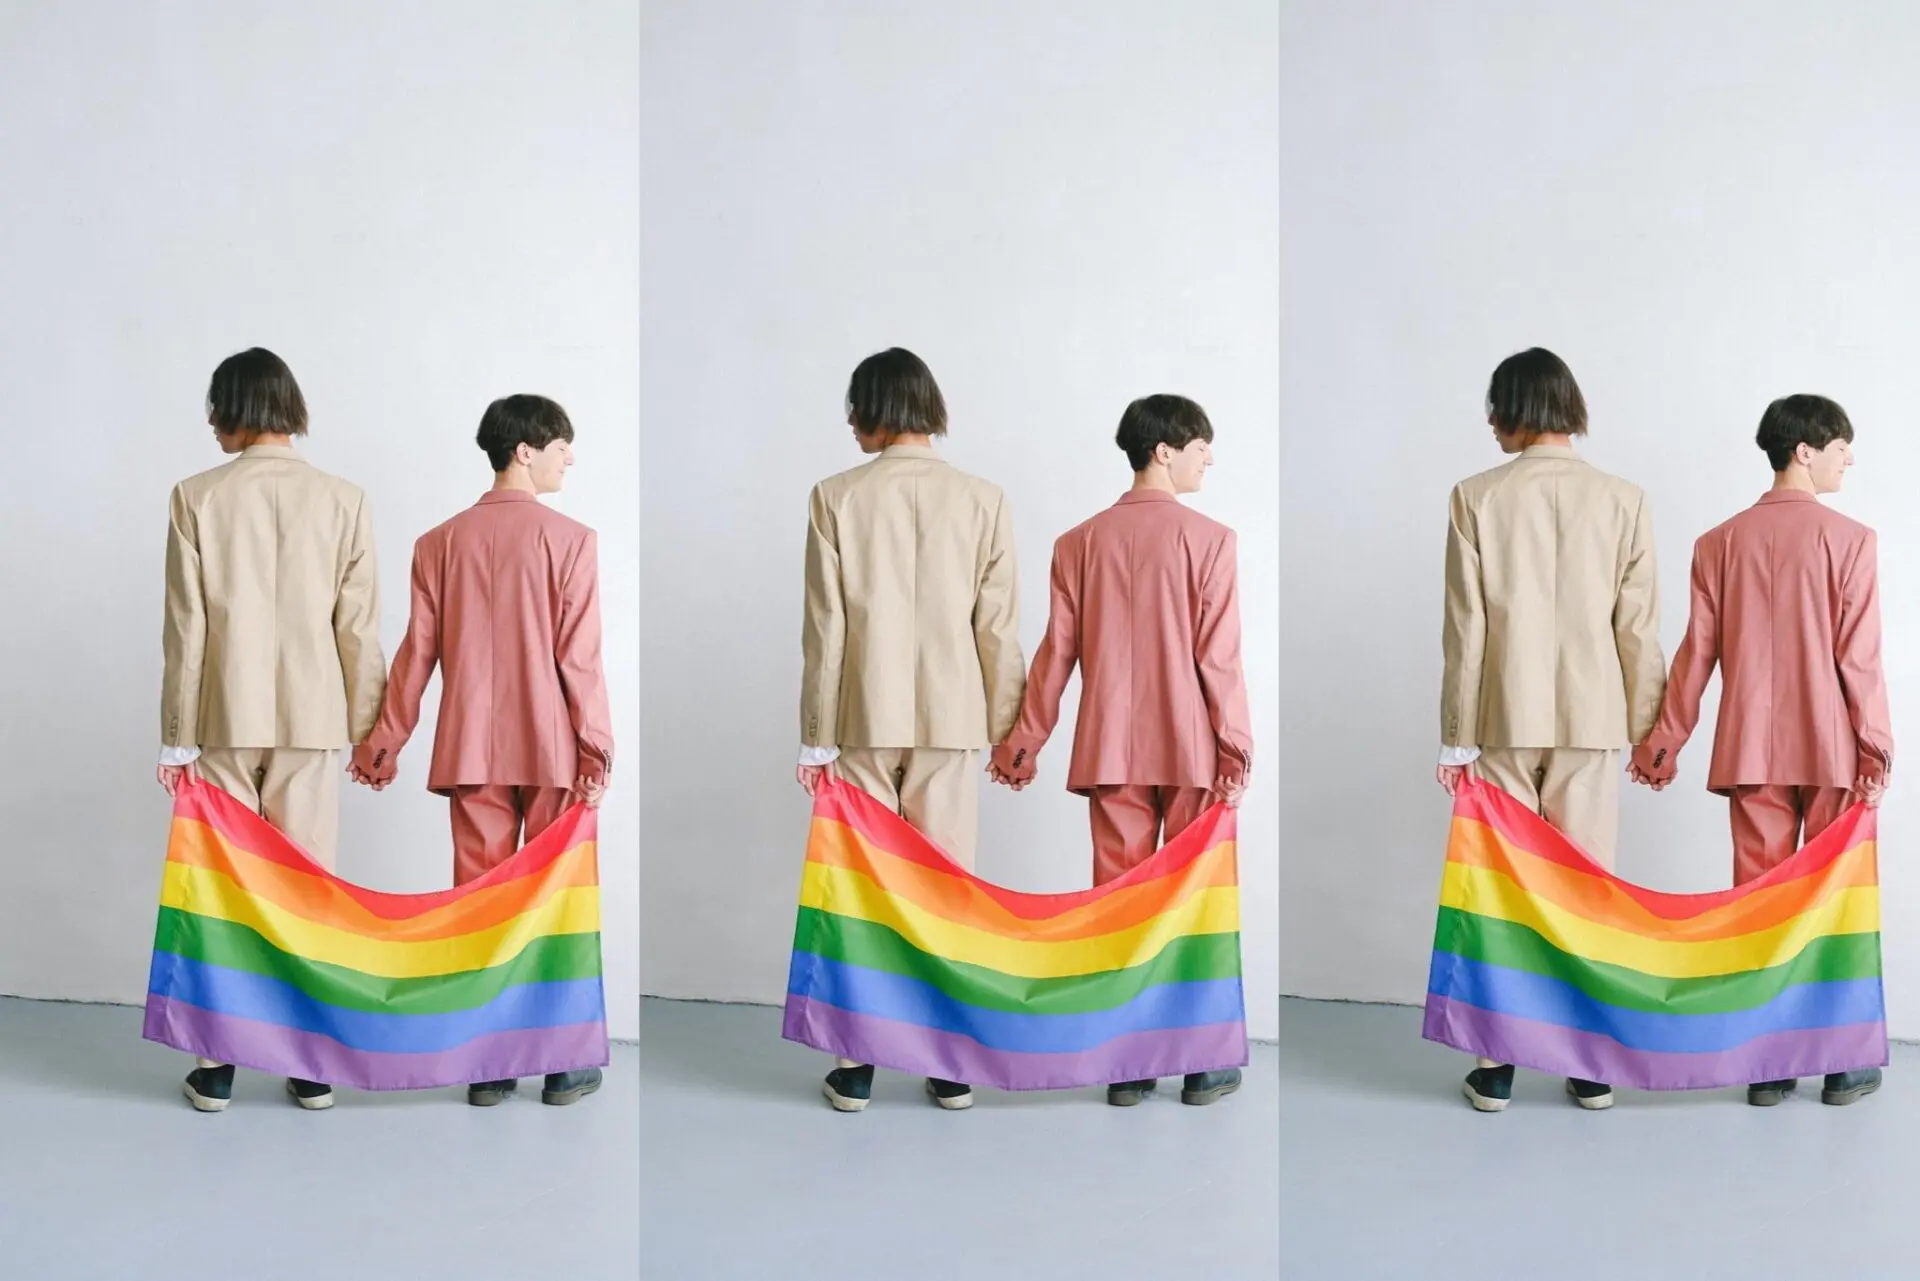 BTS Fashion: 4 Outfits That Prove Clothes Have No Gender